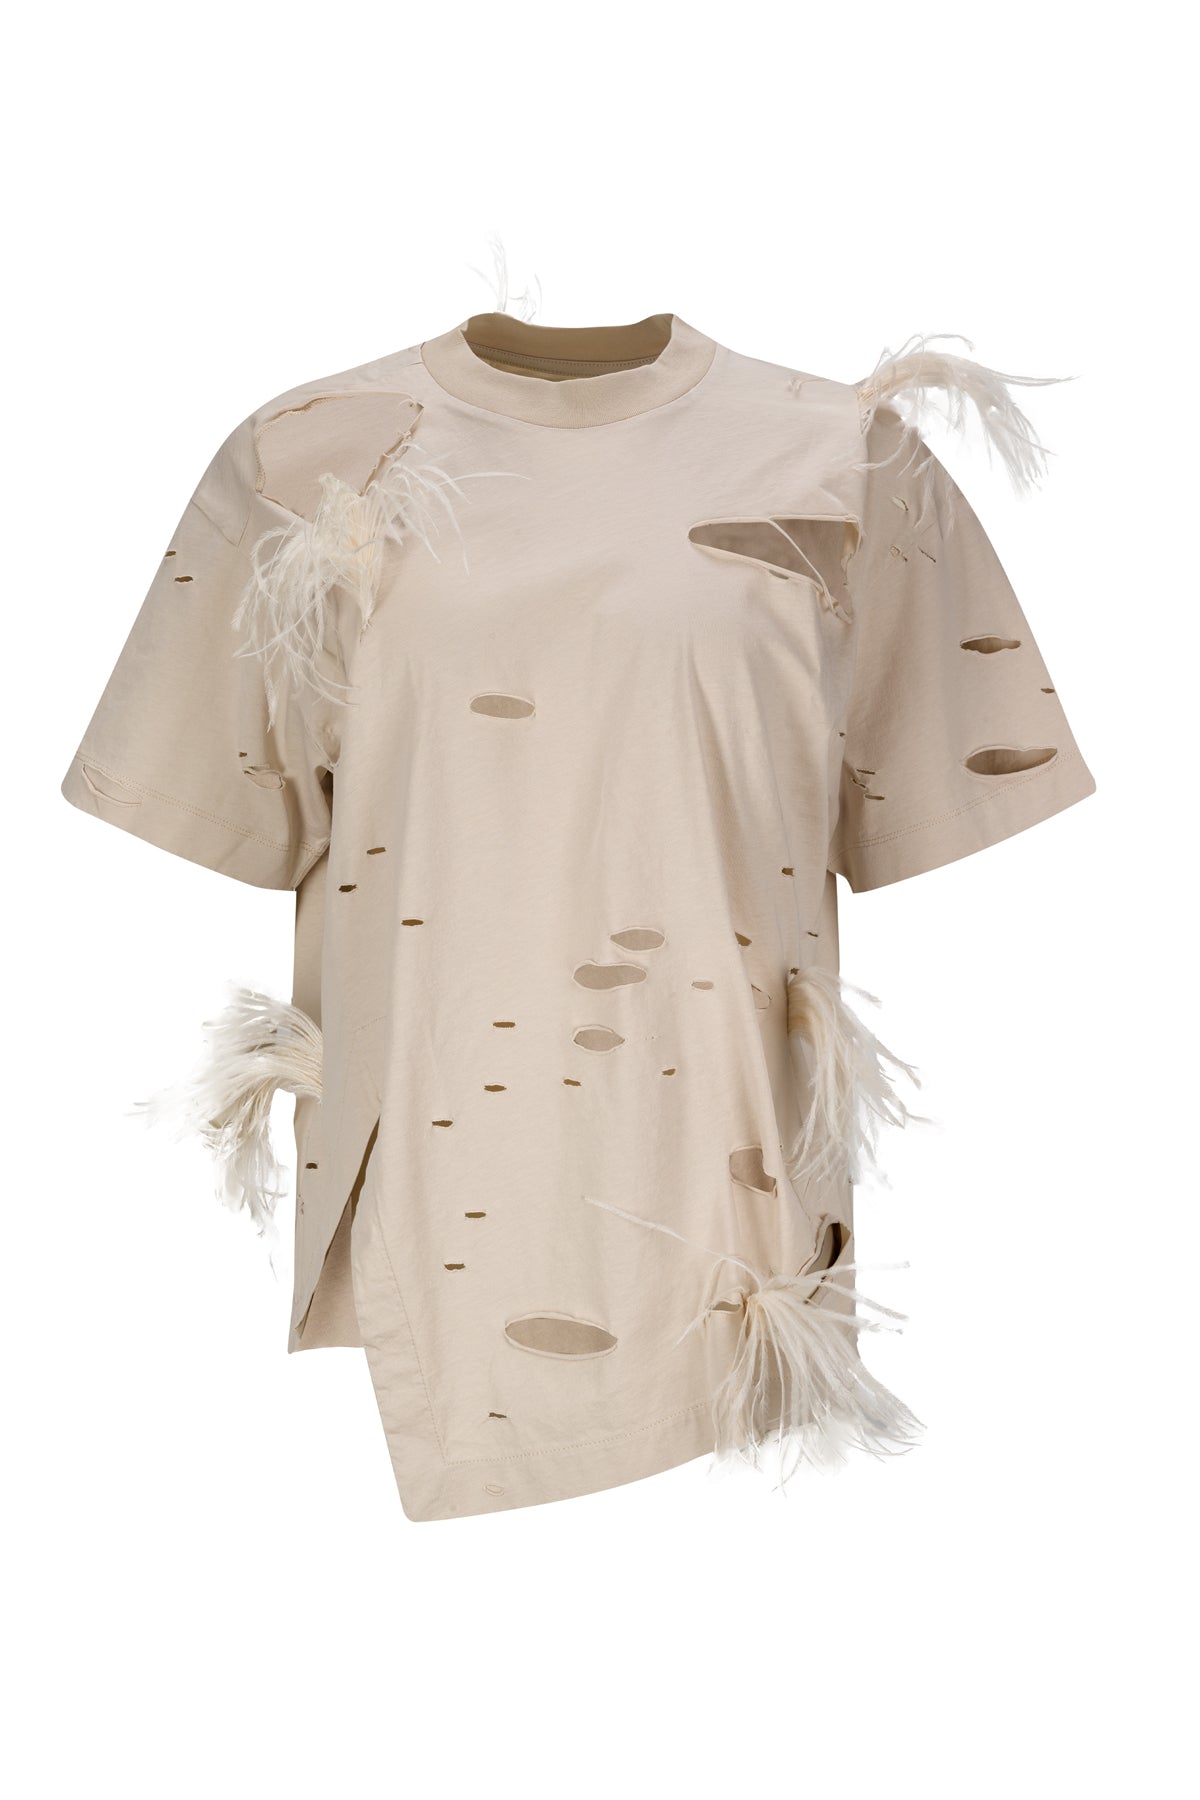 BEIGE DISTRESSED T-SHIRT WITH FEATHERS marques almeida